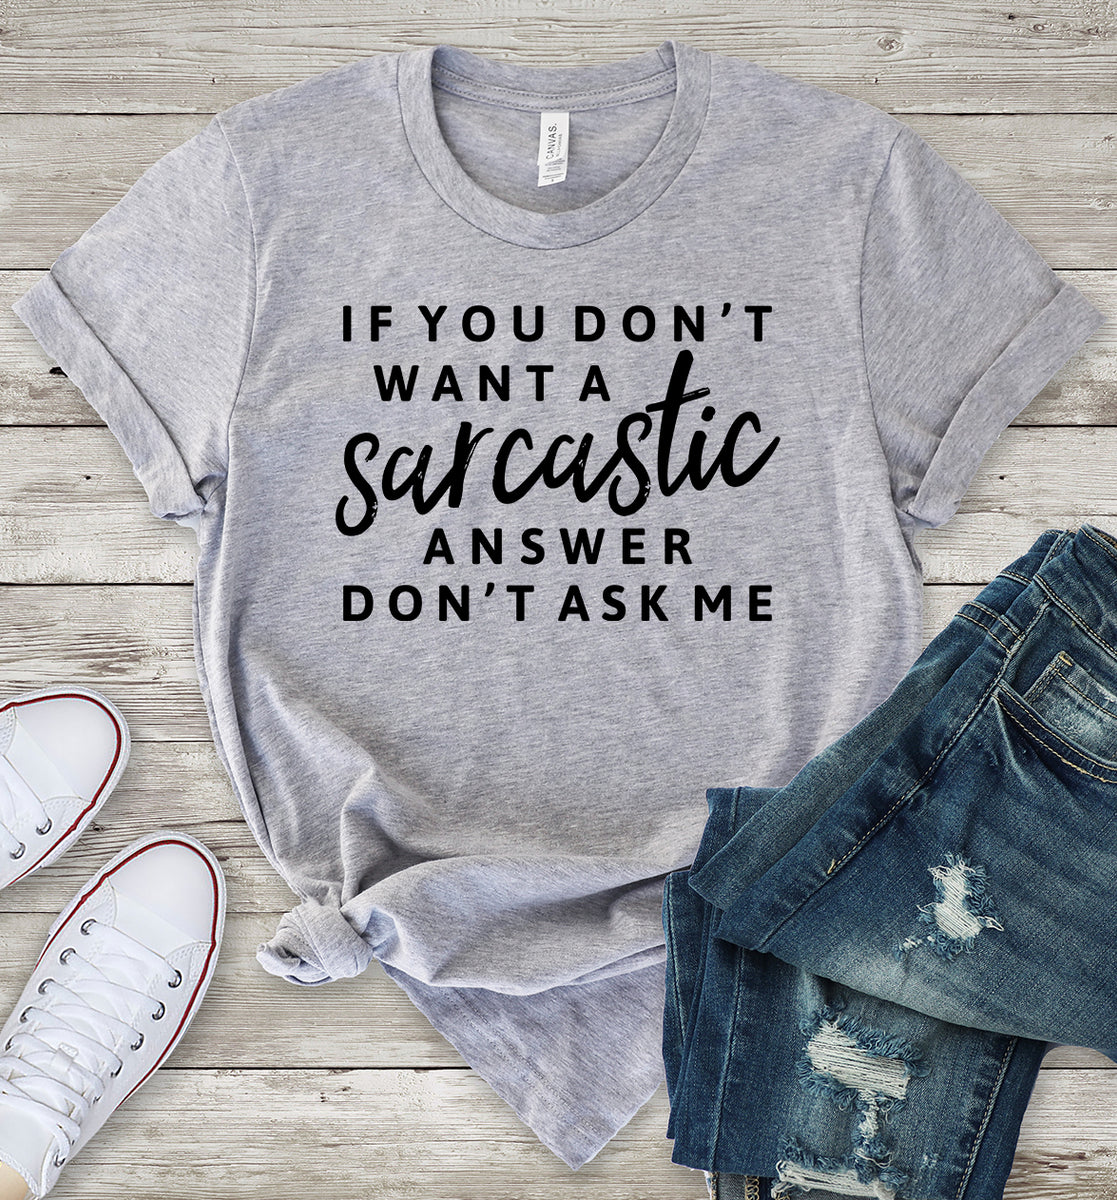 If You Don't Want a Sarcastic Answer Don't Ask Me Light Grey T-Shirt